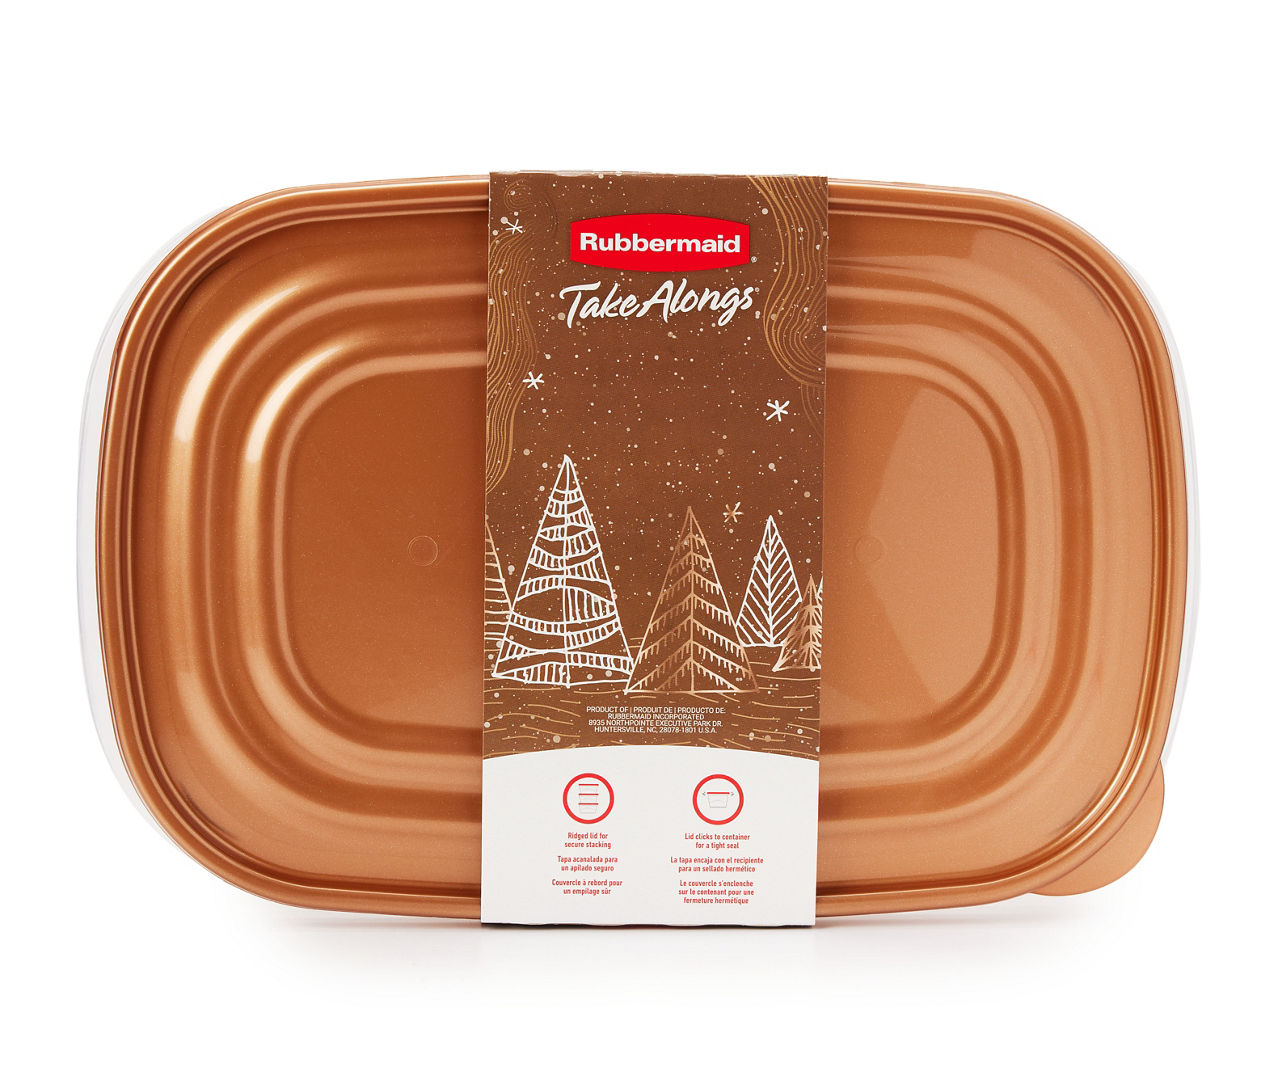 Rubbermaid Take-Along Rectangular Container - 2 Pack - Toffee Nut, 1.1 gal  - Kroger